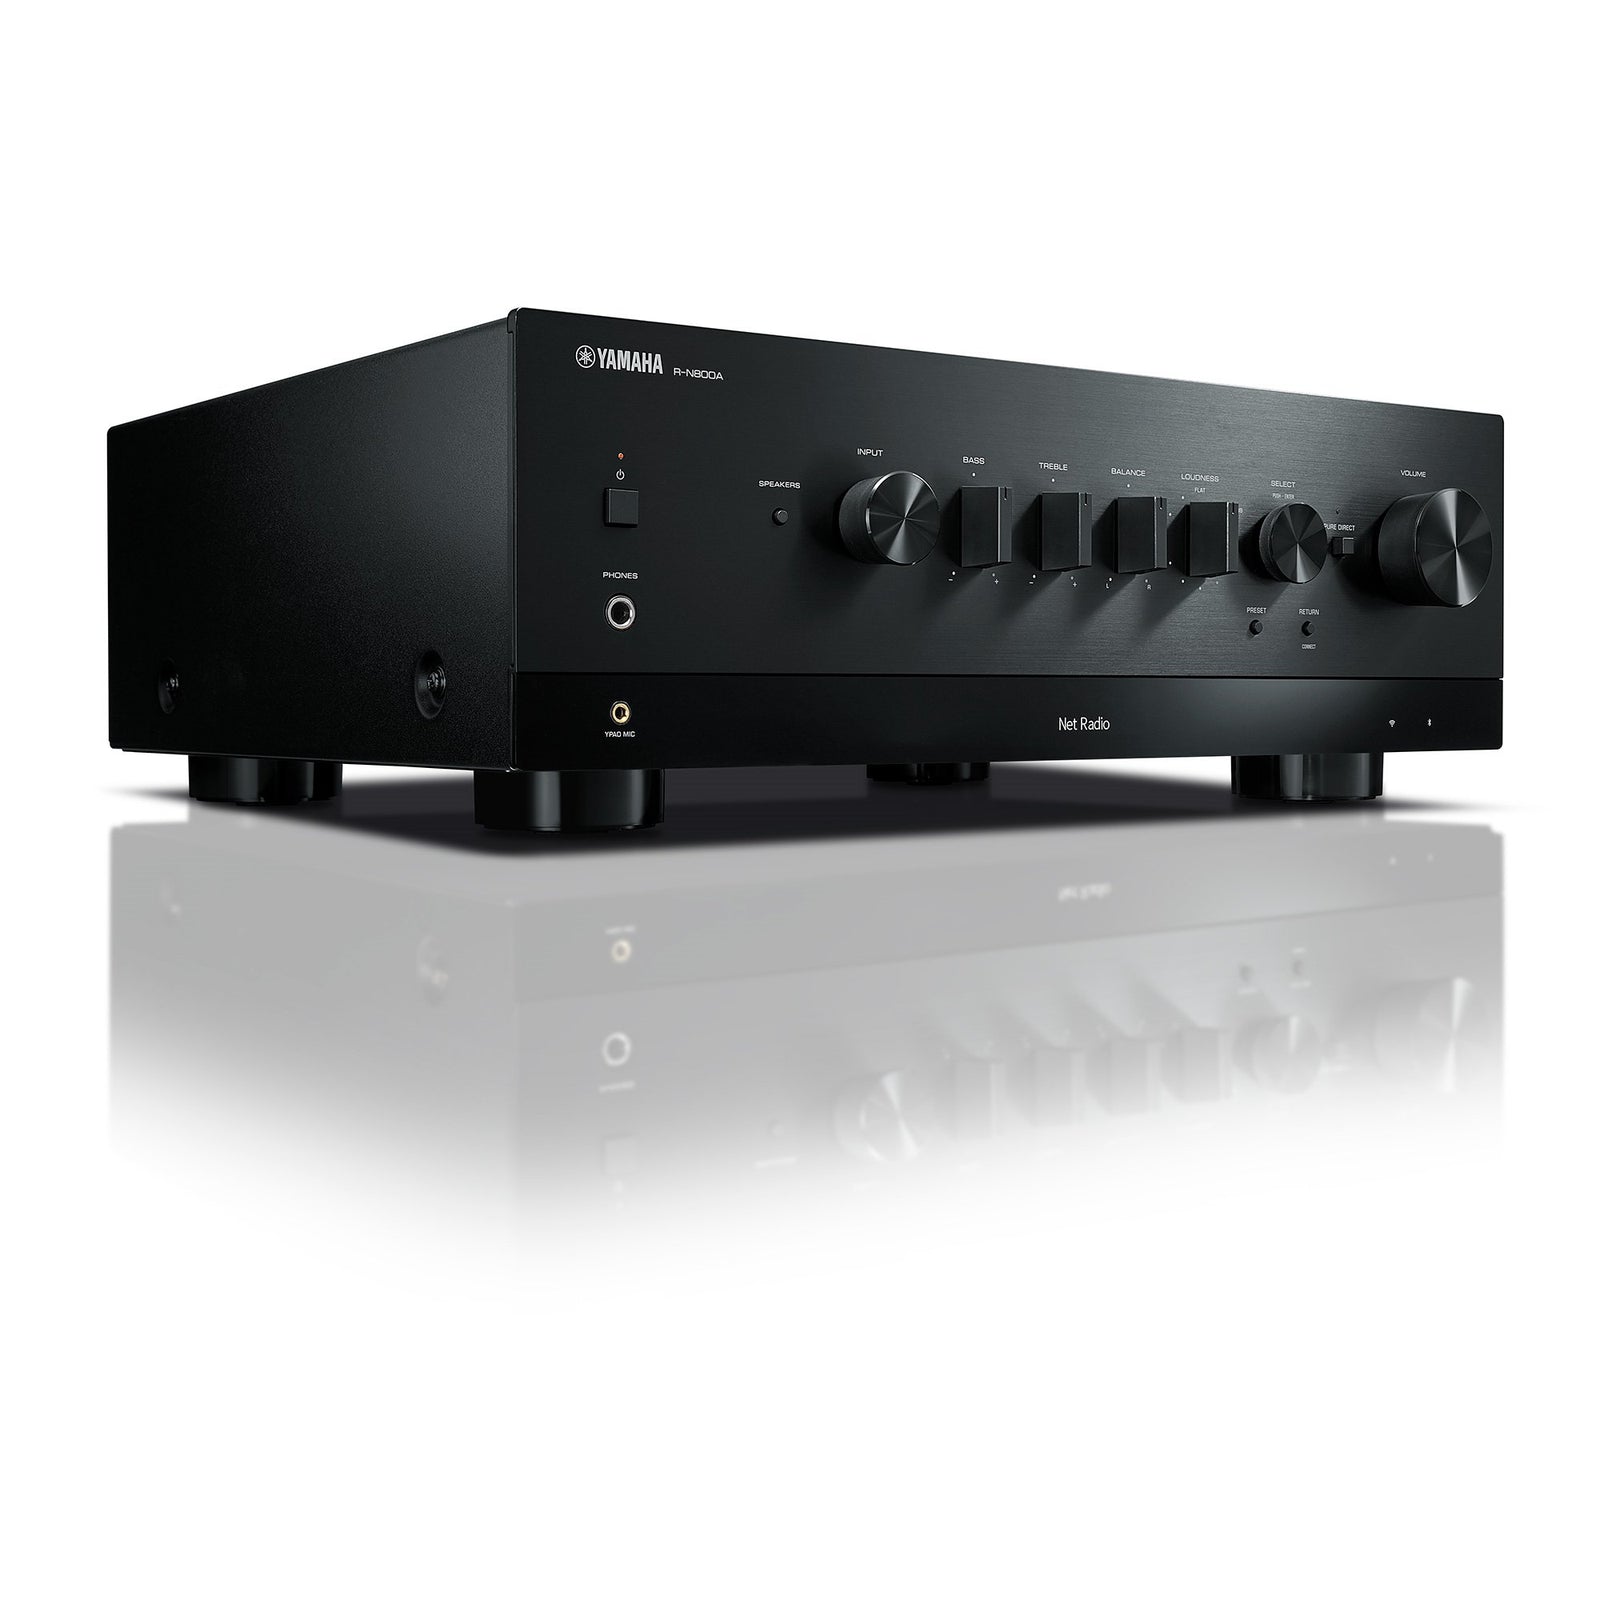 YAMAHA R-N800A NETWORK RECEIVER | VINYL SOUND The Yamaha R-N800A delivers music enjoyment with a modern HiFi style. It includes our original YPAO™ technology to create an ideal listening environment. From streaming services to high-resolution sound sources, you can immerse yourself in superb sound quality.